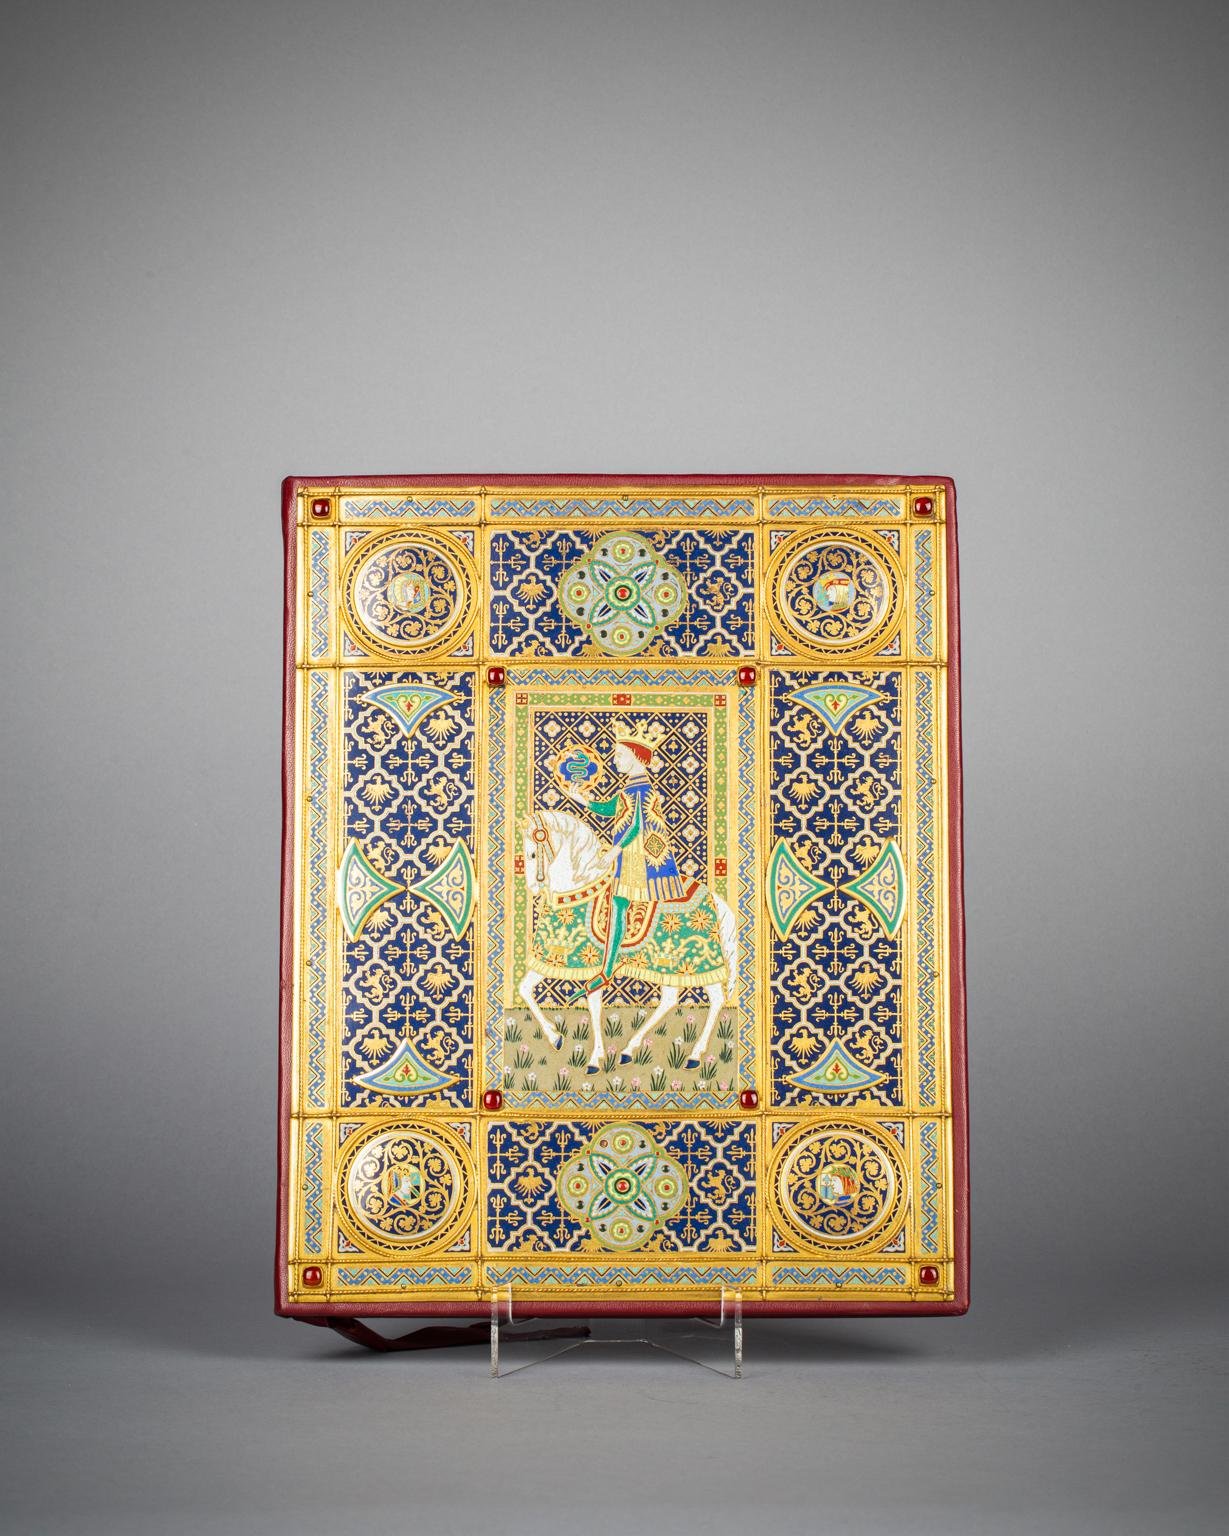 E.F. Caldwell Champlevé Enamel and Jeweled Folio Cover, Early 20th century.